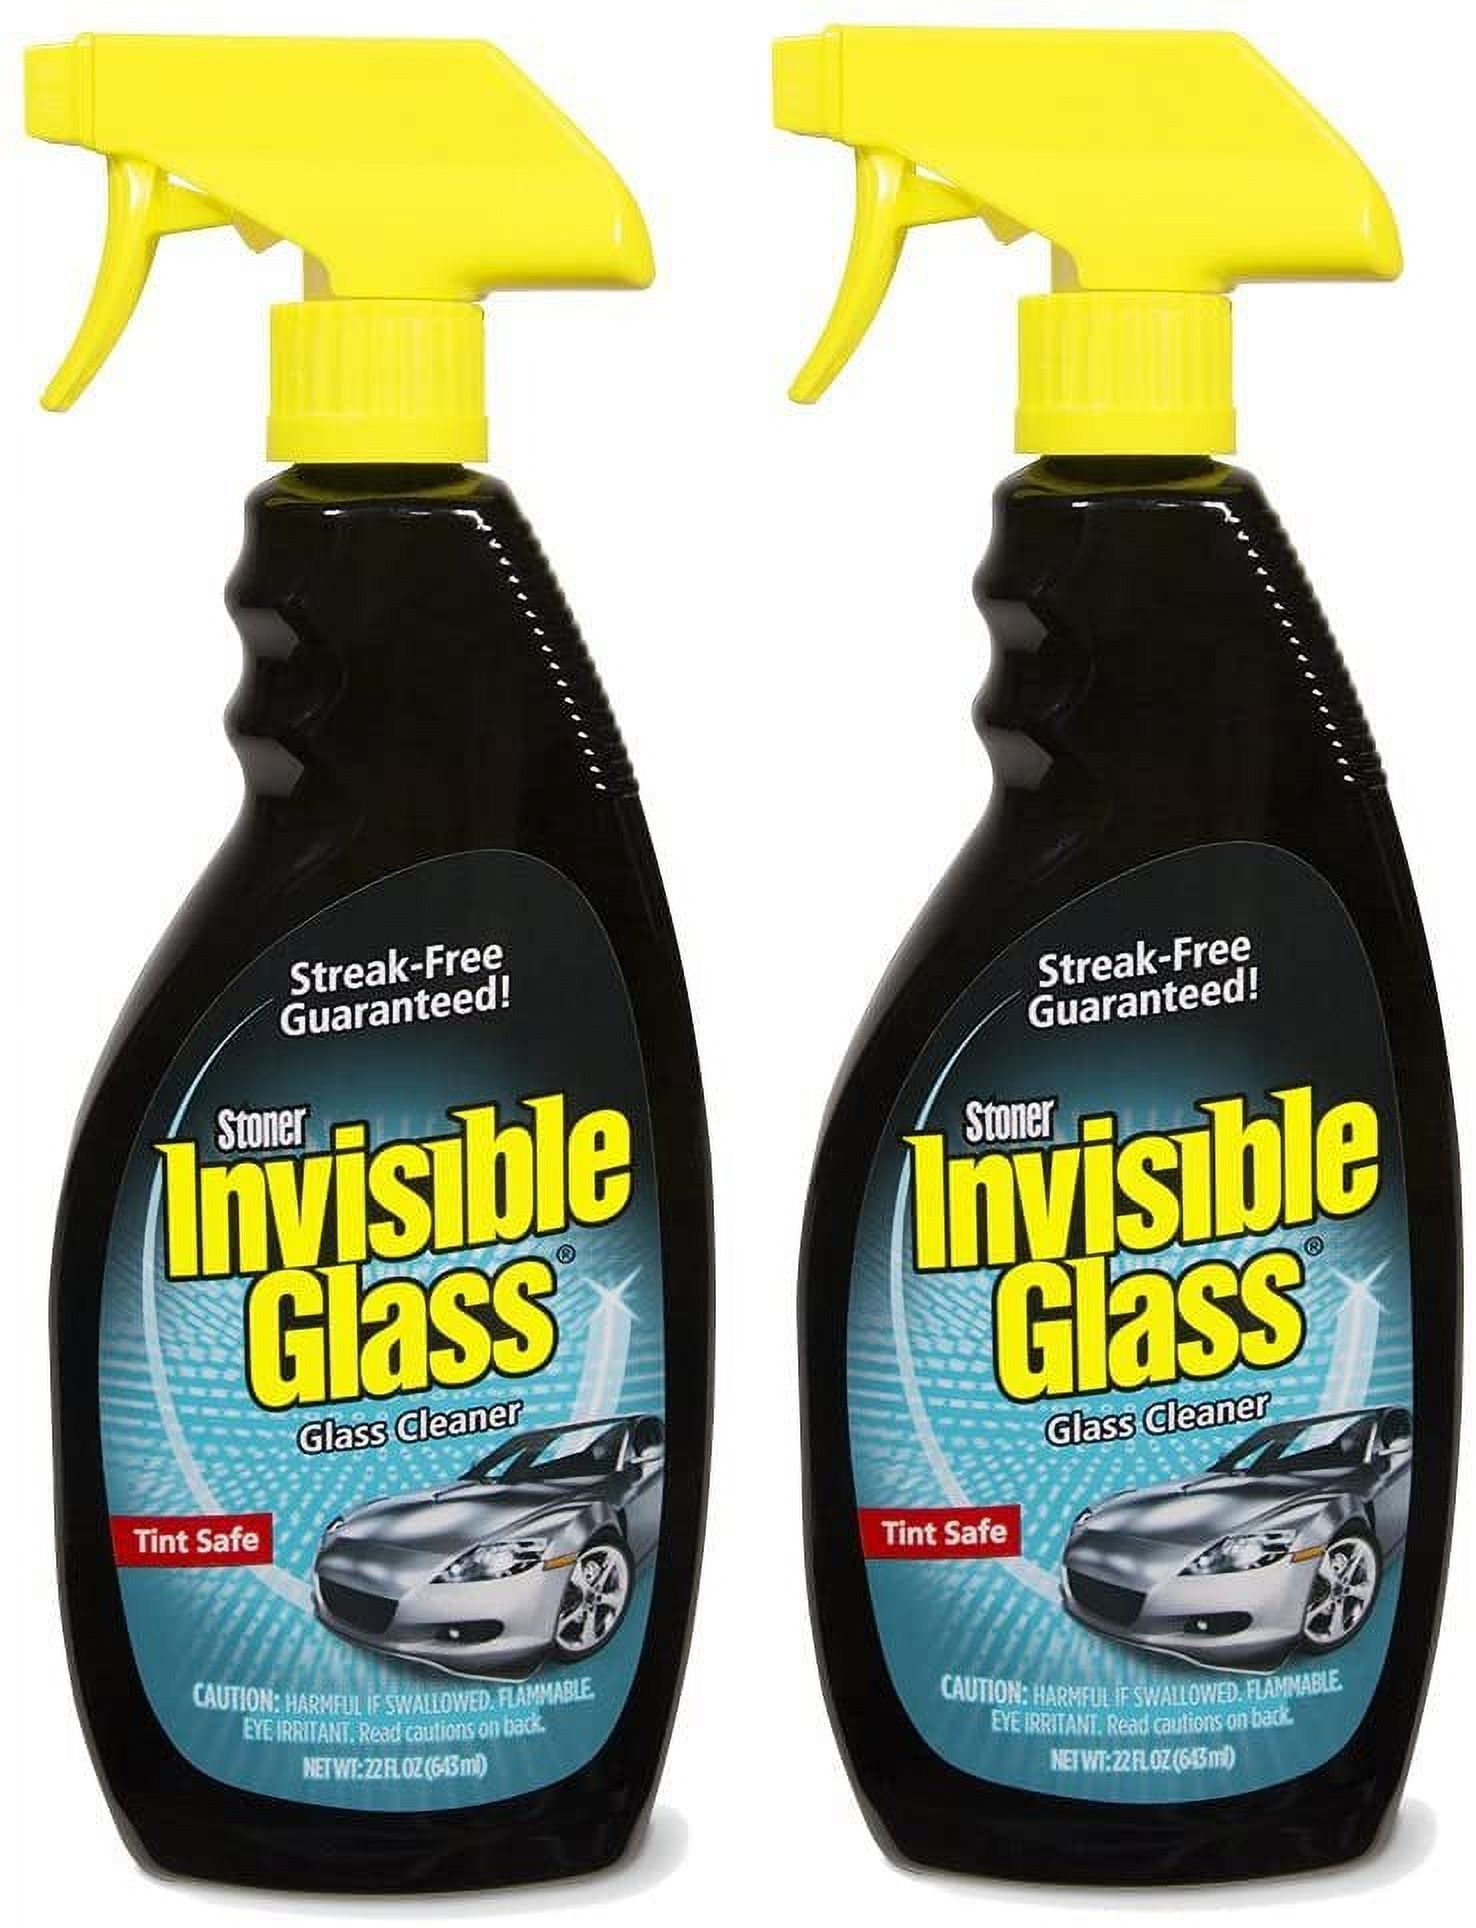 Invisible Glass 92164-2PK 22-Ounce Premium Glass Cleaner and Window Spray for Auto and Home Provides a Streak-Free Shine on Windows, Windshields, and Mirrors is Residue and Ammonia Free and Tint Safe - image 1 of 6